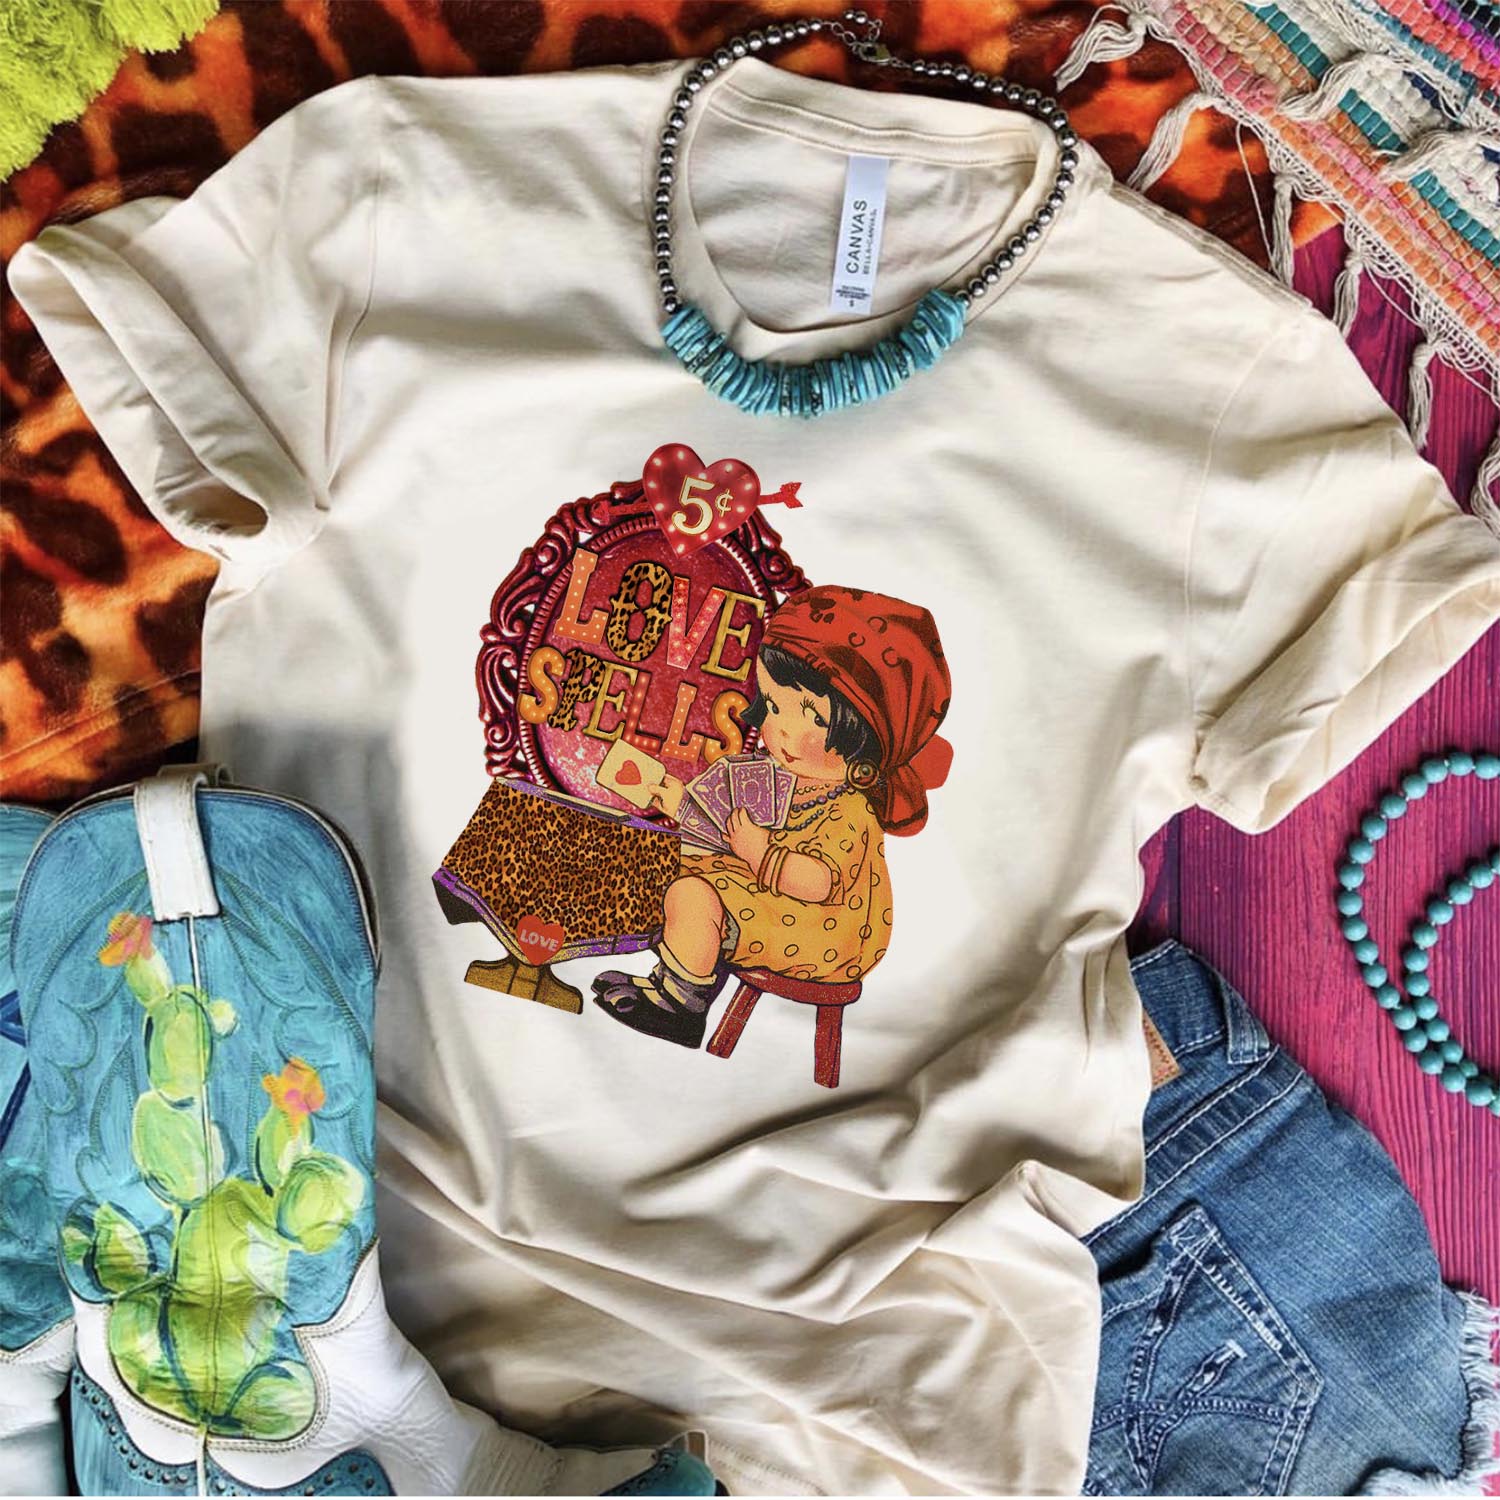 An ivory short sleeve teeshirt that has a gyspy graphic that says "Love Spells." Pictured on multicolored rugs with a turquoise necklace, cowgirl boots, and denim shorts.